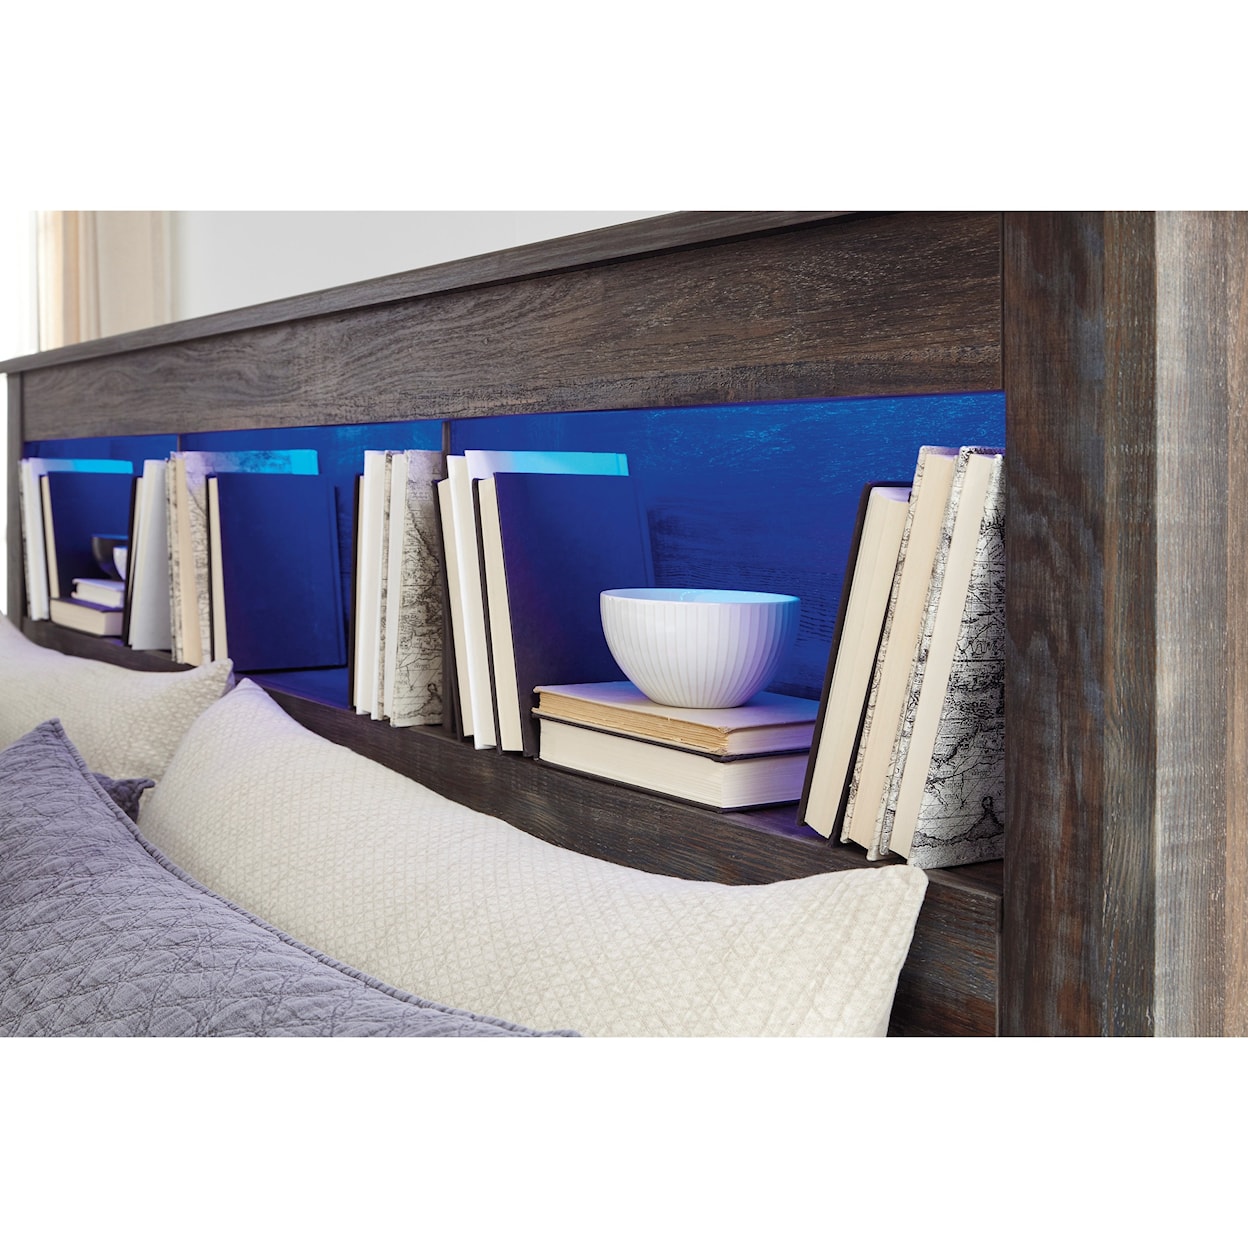 Ashley Furniture Signature Design Drystan Full Bookcase Bed with Underbed Storage